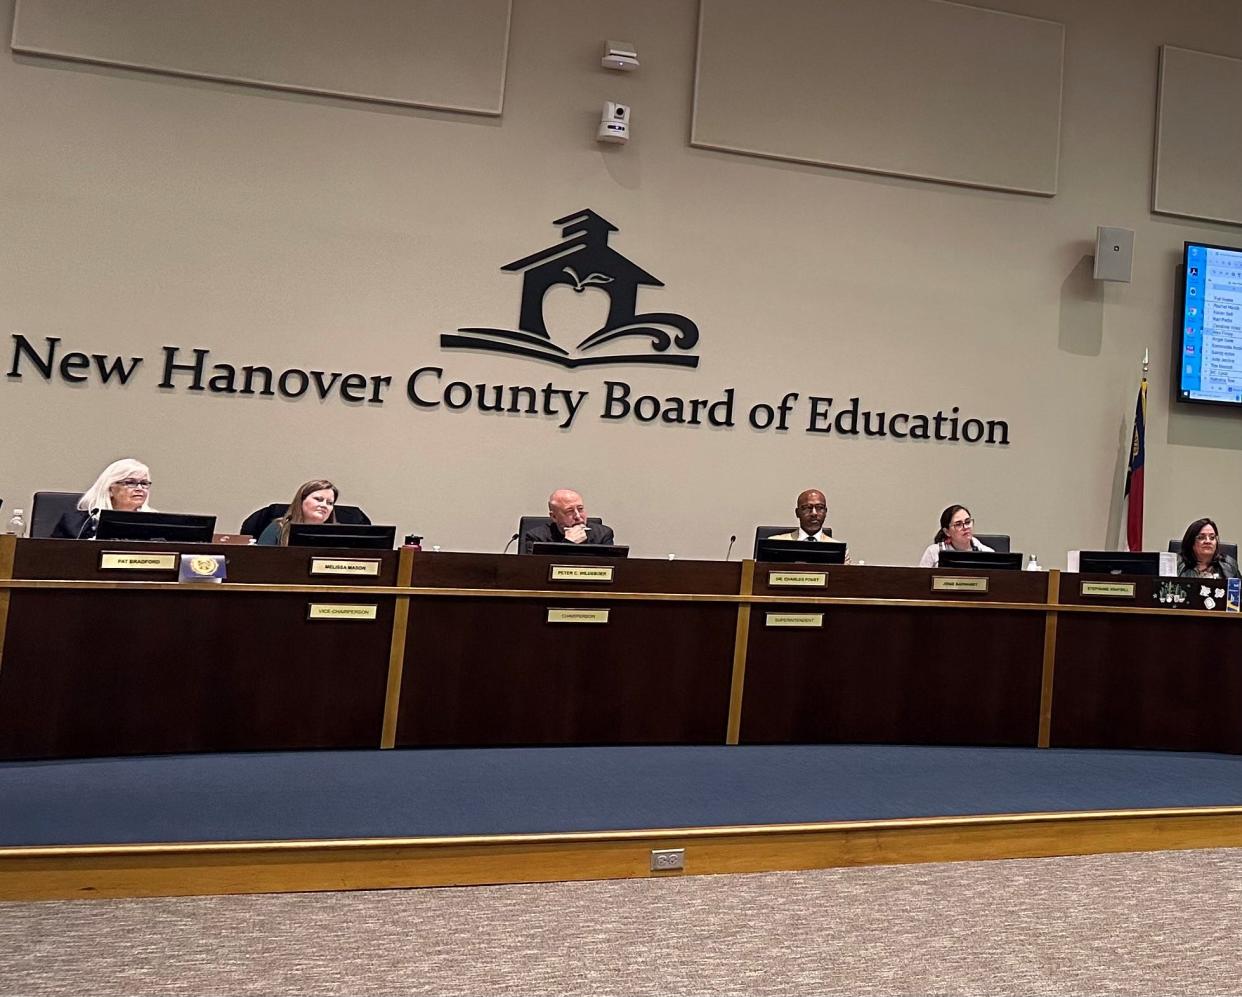 The New Hanover County Board of Education passed temporary policy changes Tuesday night that will limit what teachers can display in their classrooms.